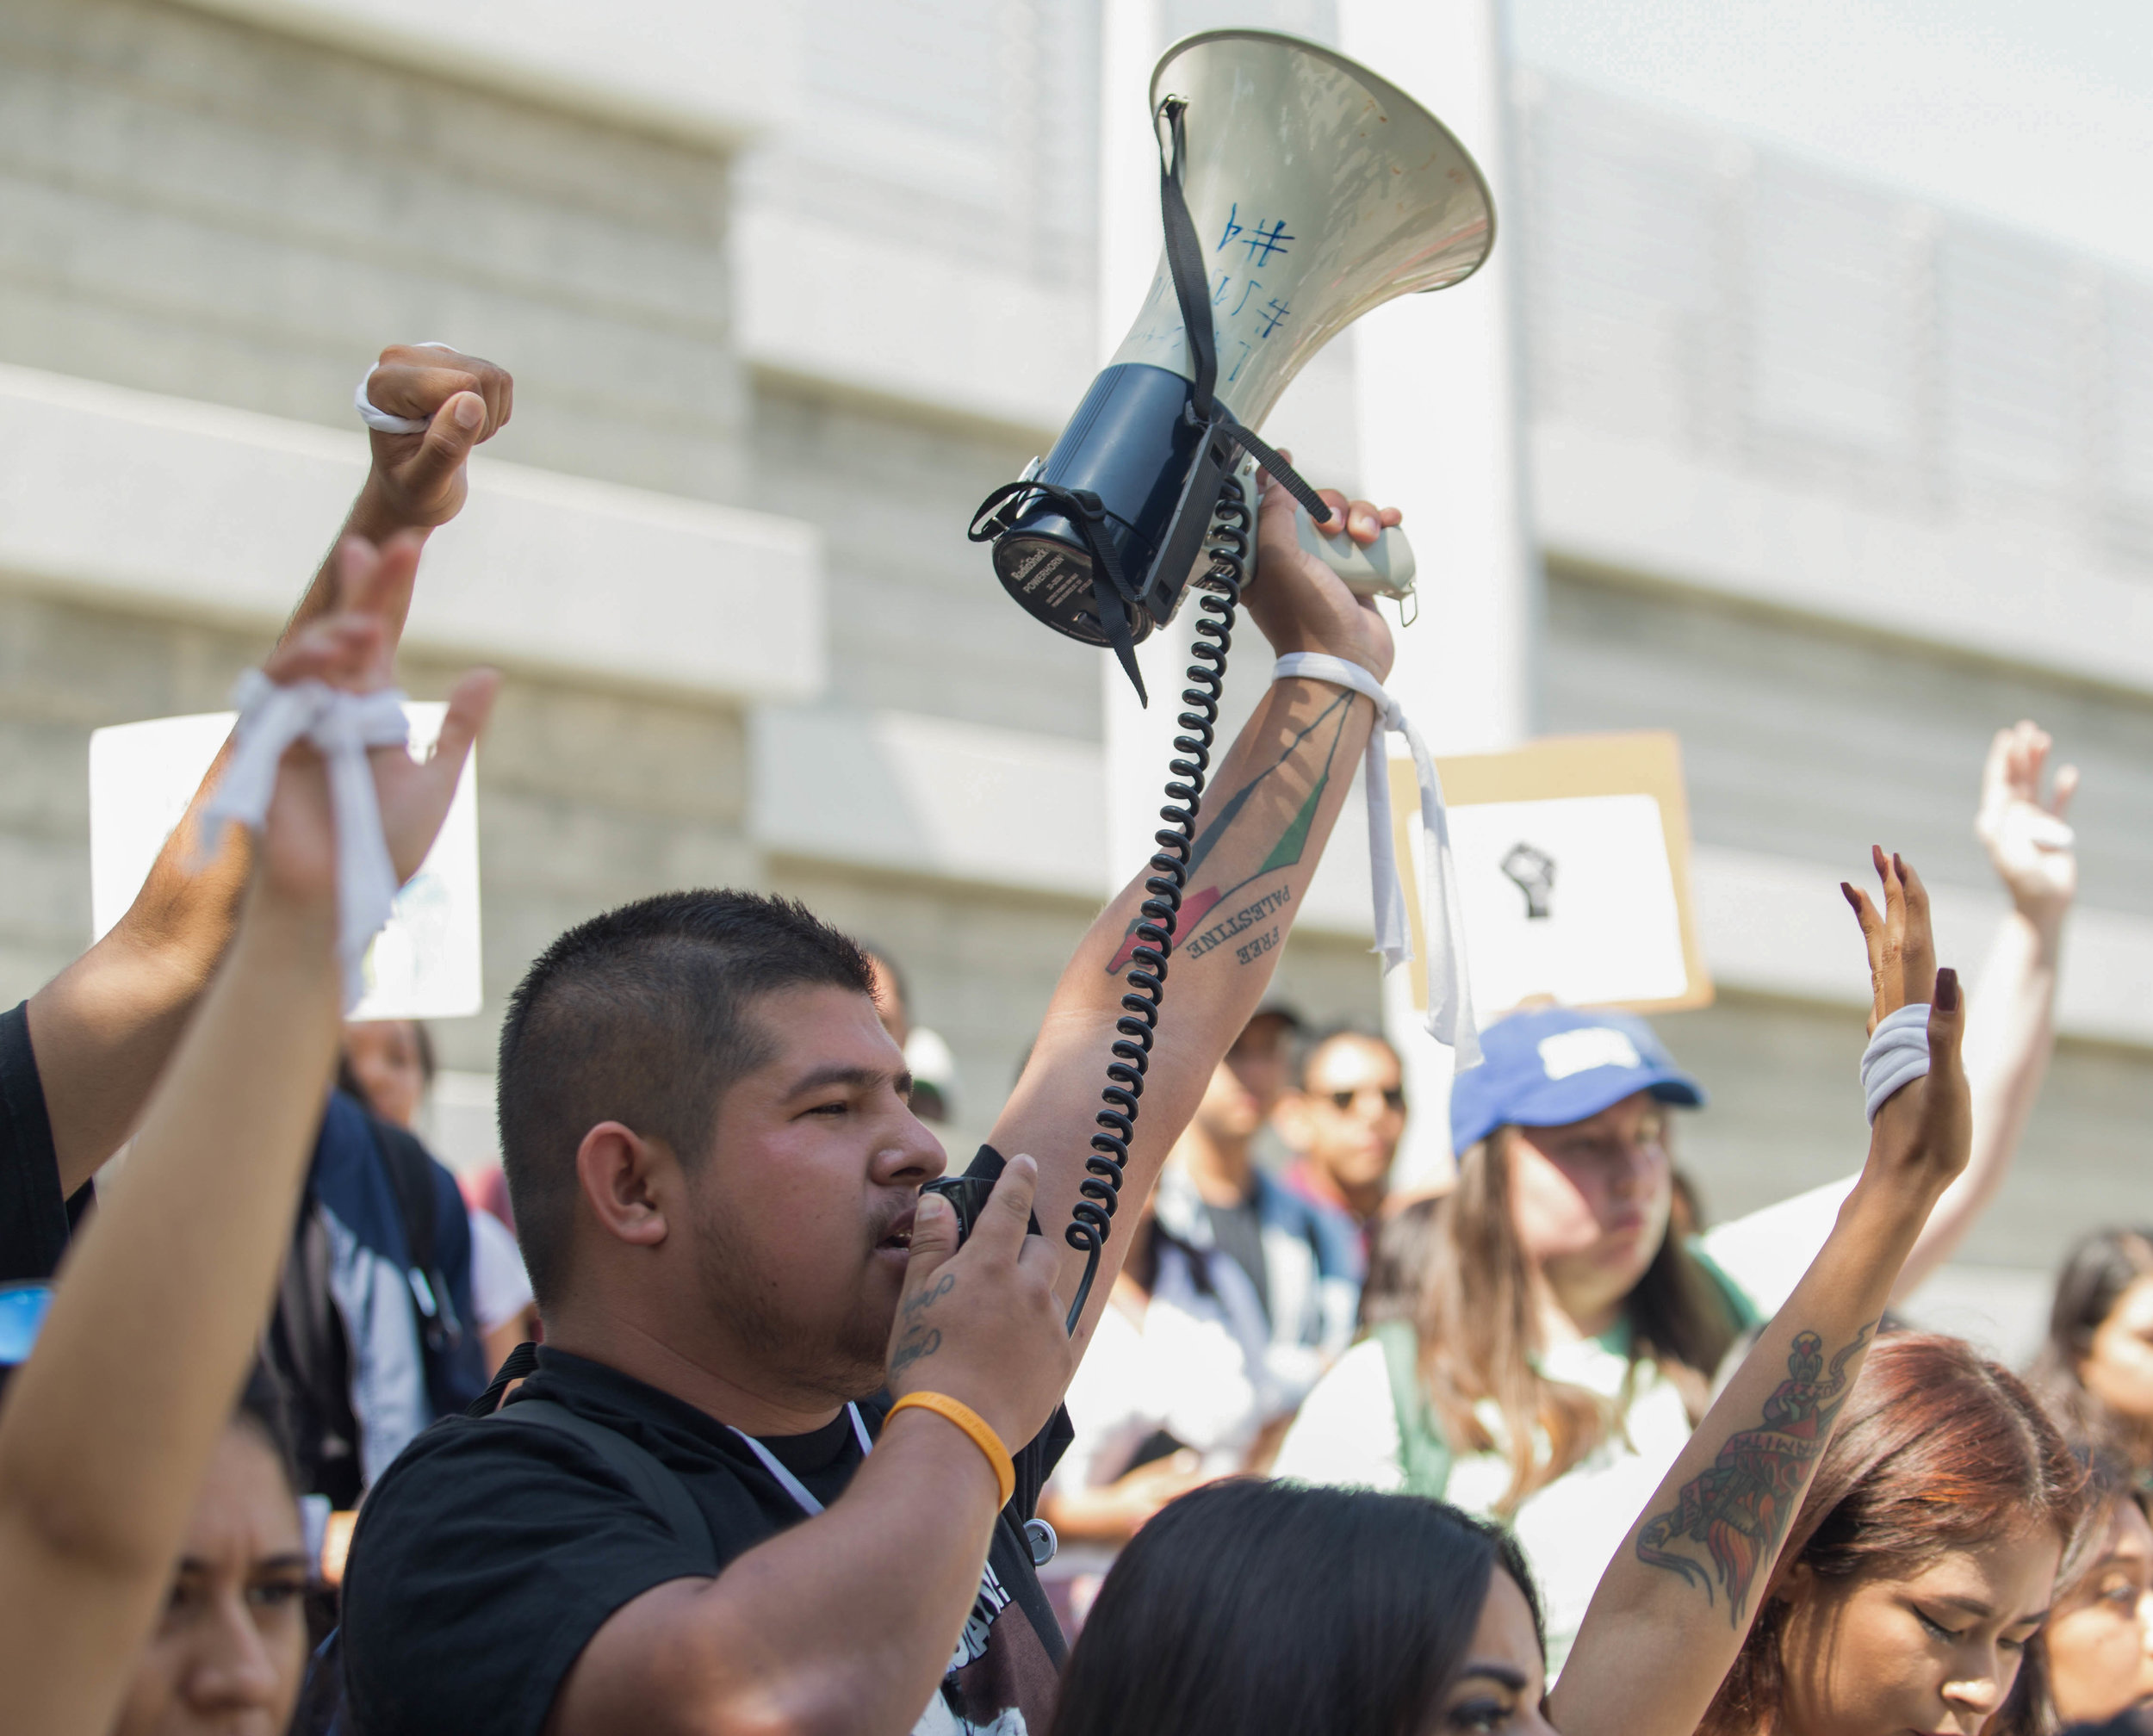  Edgar Gonzalez raises his Megaphone in the air along with other protesters raising their arms to show the strength they have to fight for DACA and against discrimination. The students chant phrases like "No papers, no fear" and "Undocumented, unafra